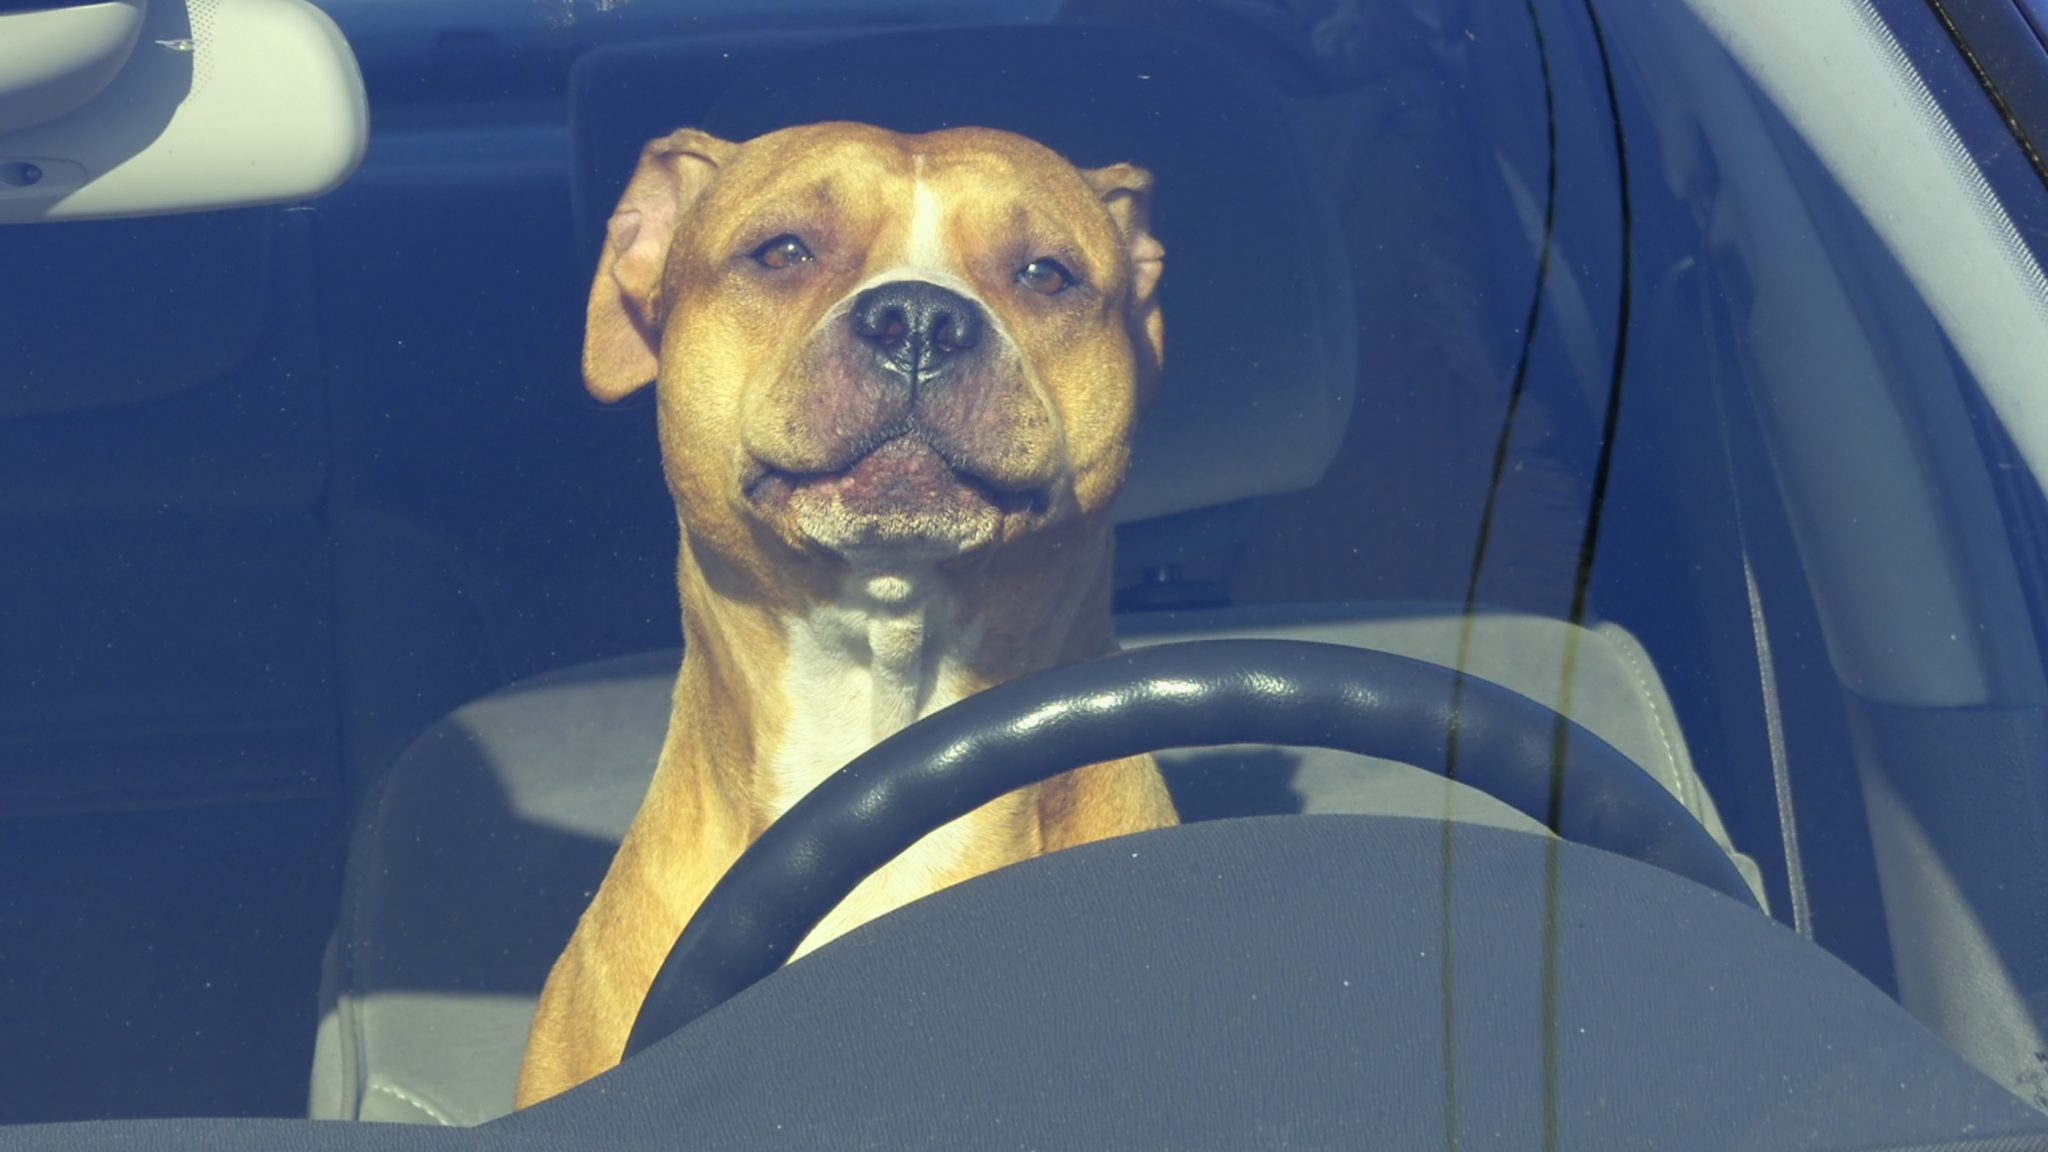 Can You Break a Window to Save a Dog in a Hot Car? - Animal Legal Defense  Fund